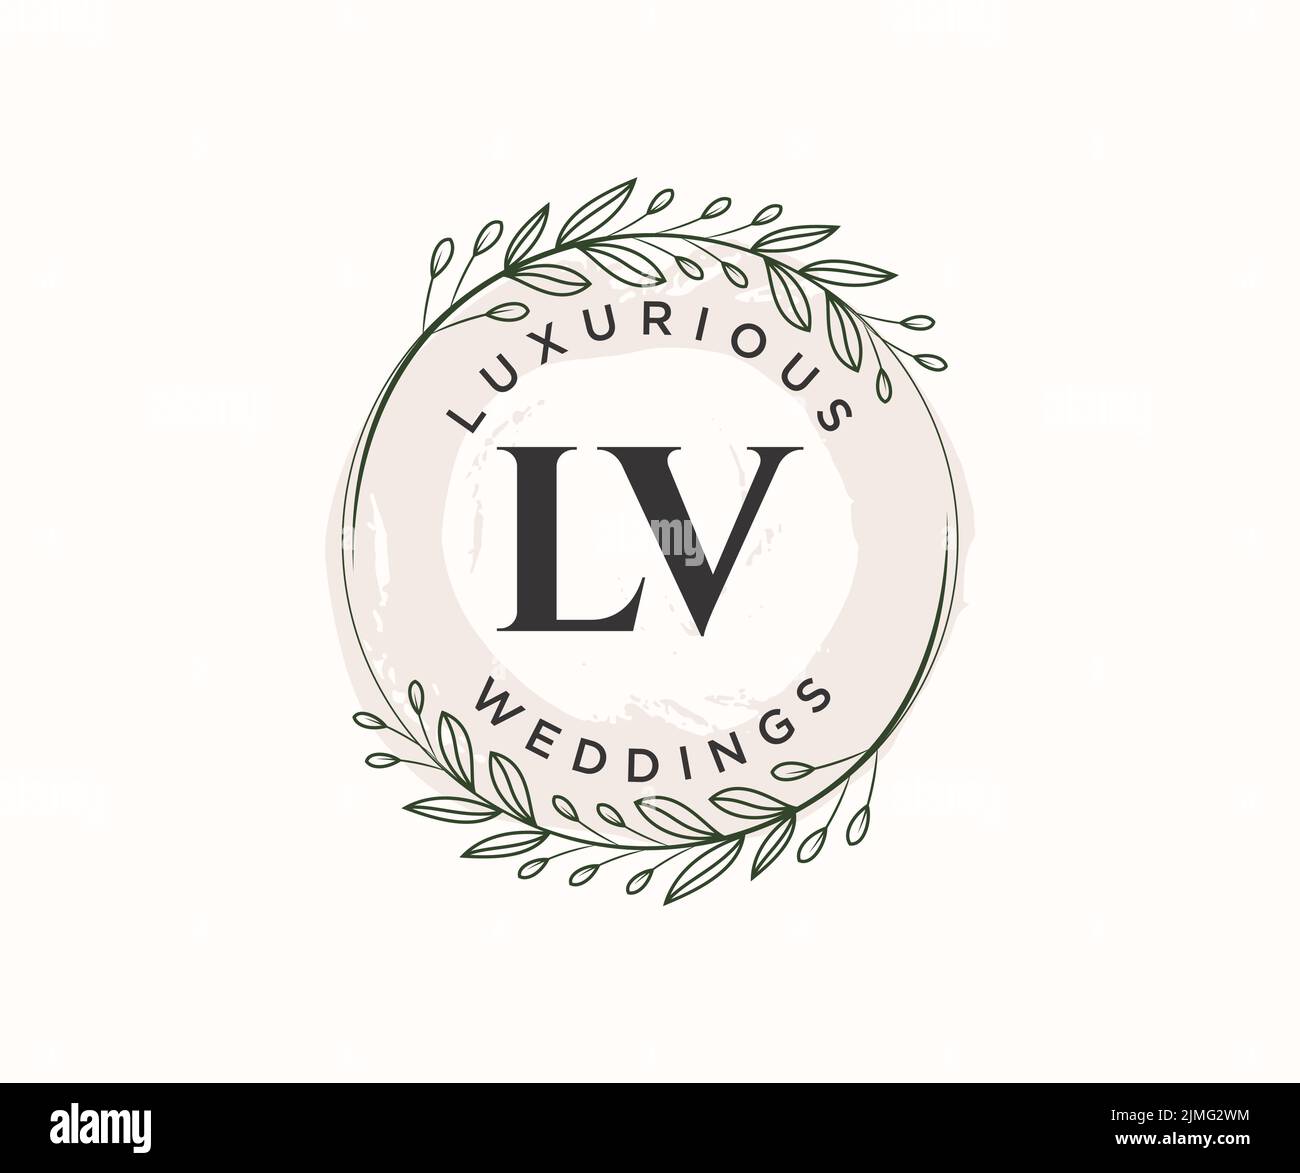 Lv logo monogram with up to down style modern Vector Image